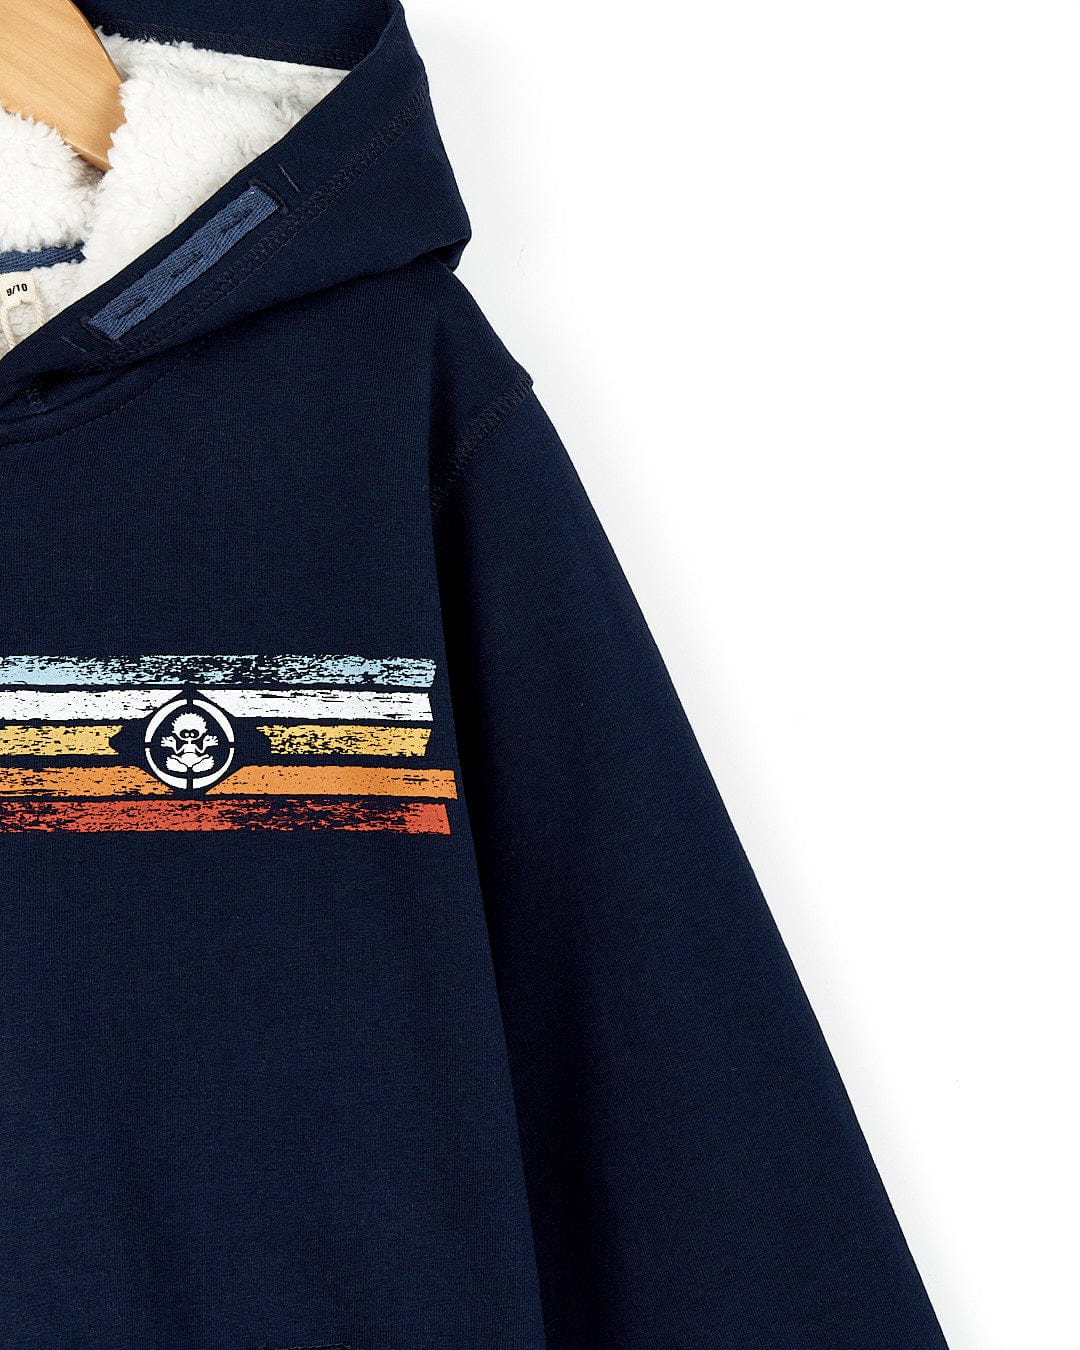 A Saltrock Tok Stripe - Kids Borg Lined Zip Hoodie - Blue with a colorful stripe on it.